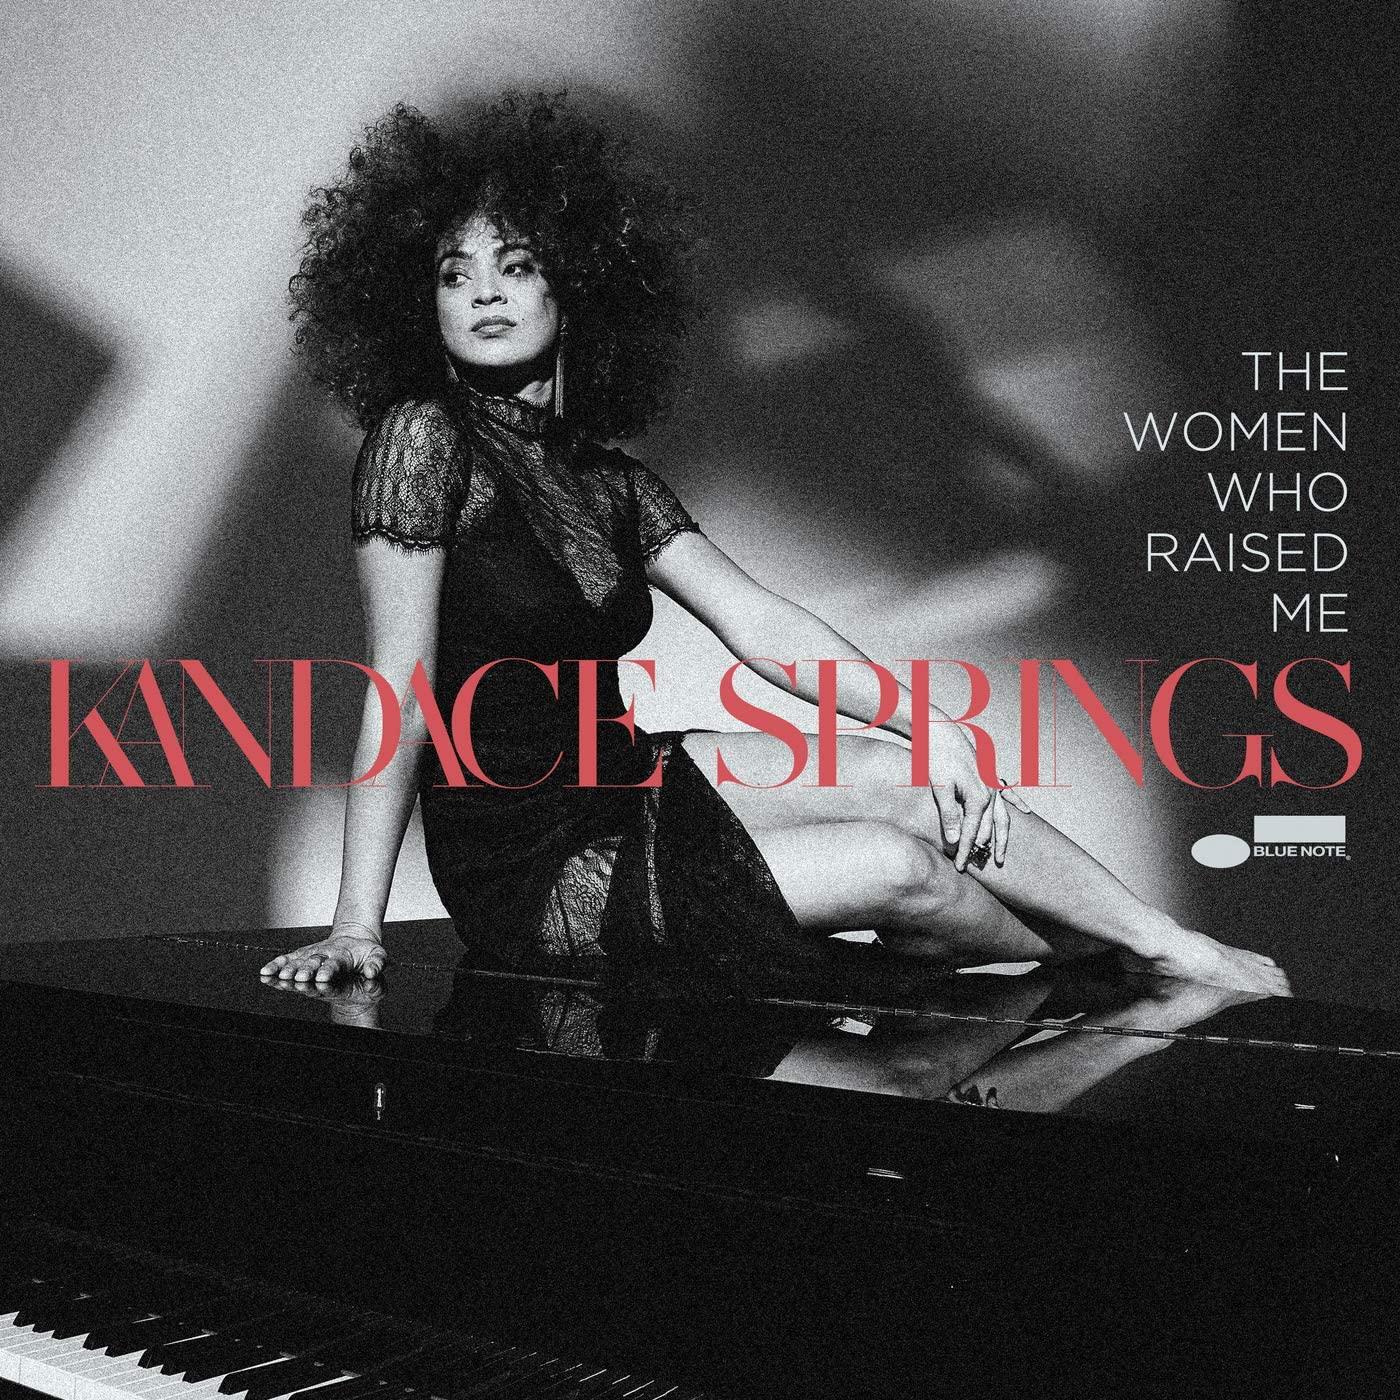 Kandace Springs - The Women Who Raised Me (2020) 2LP